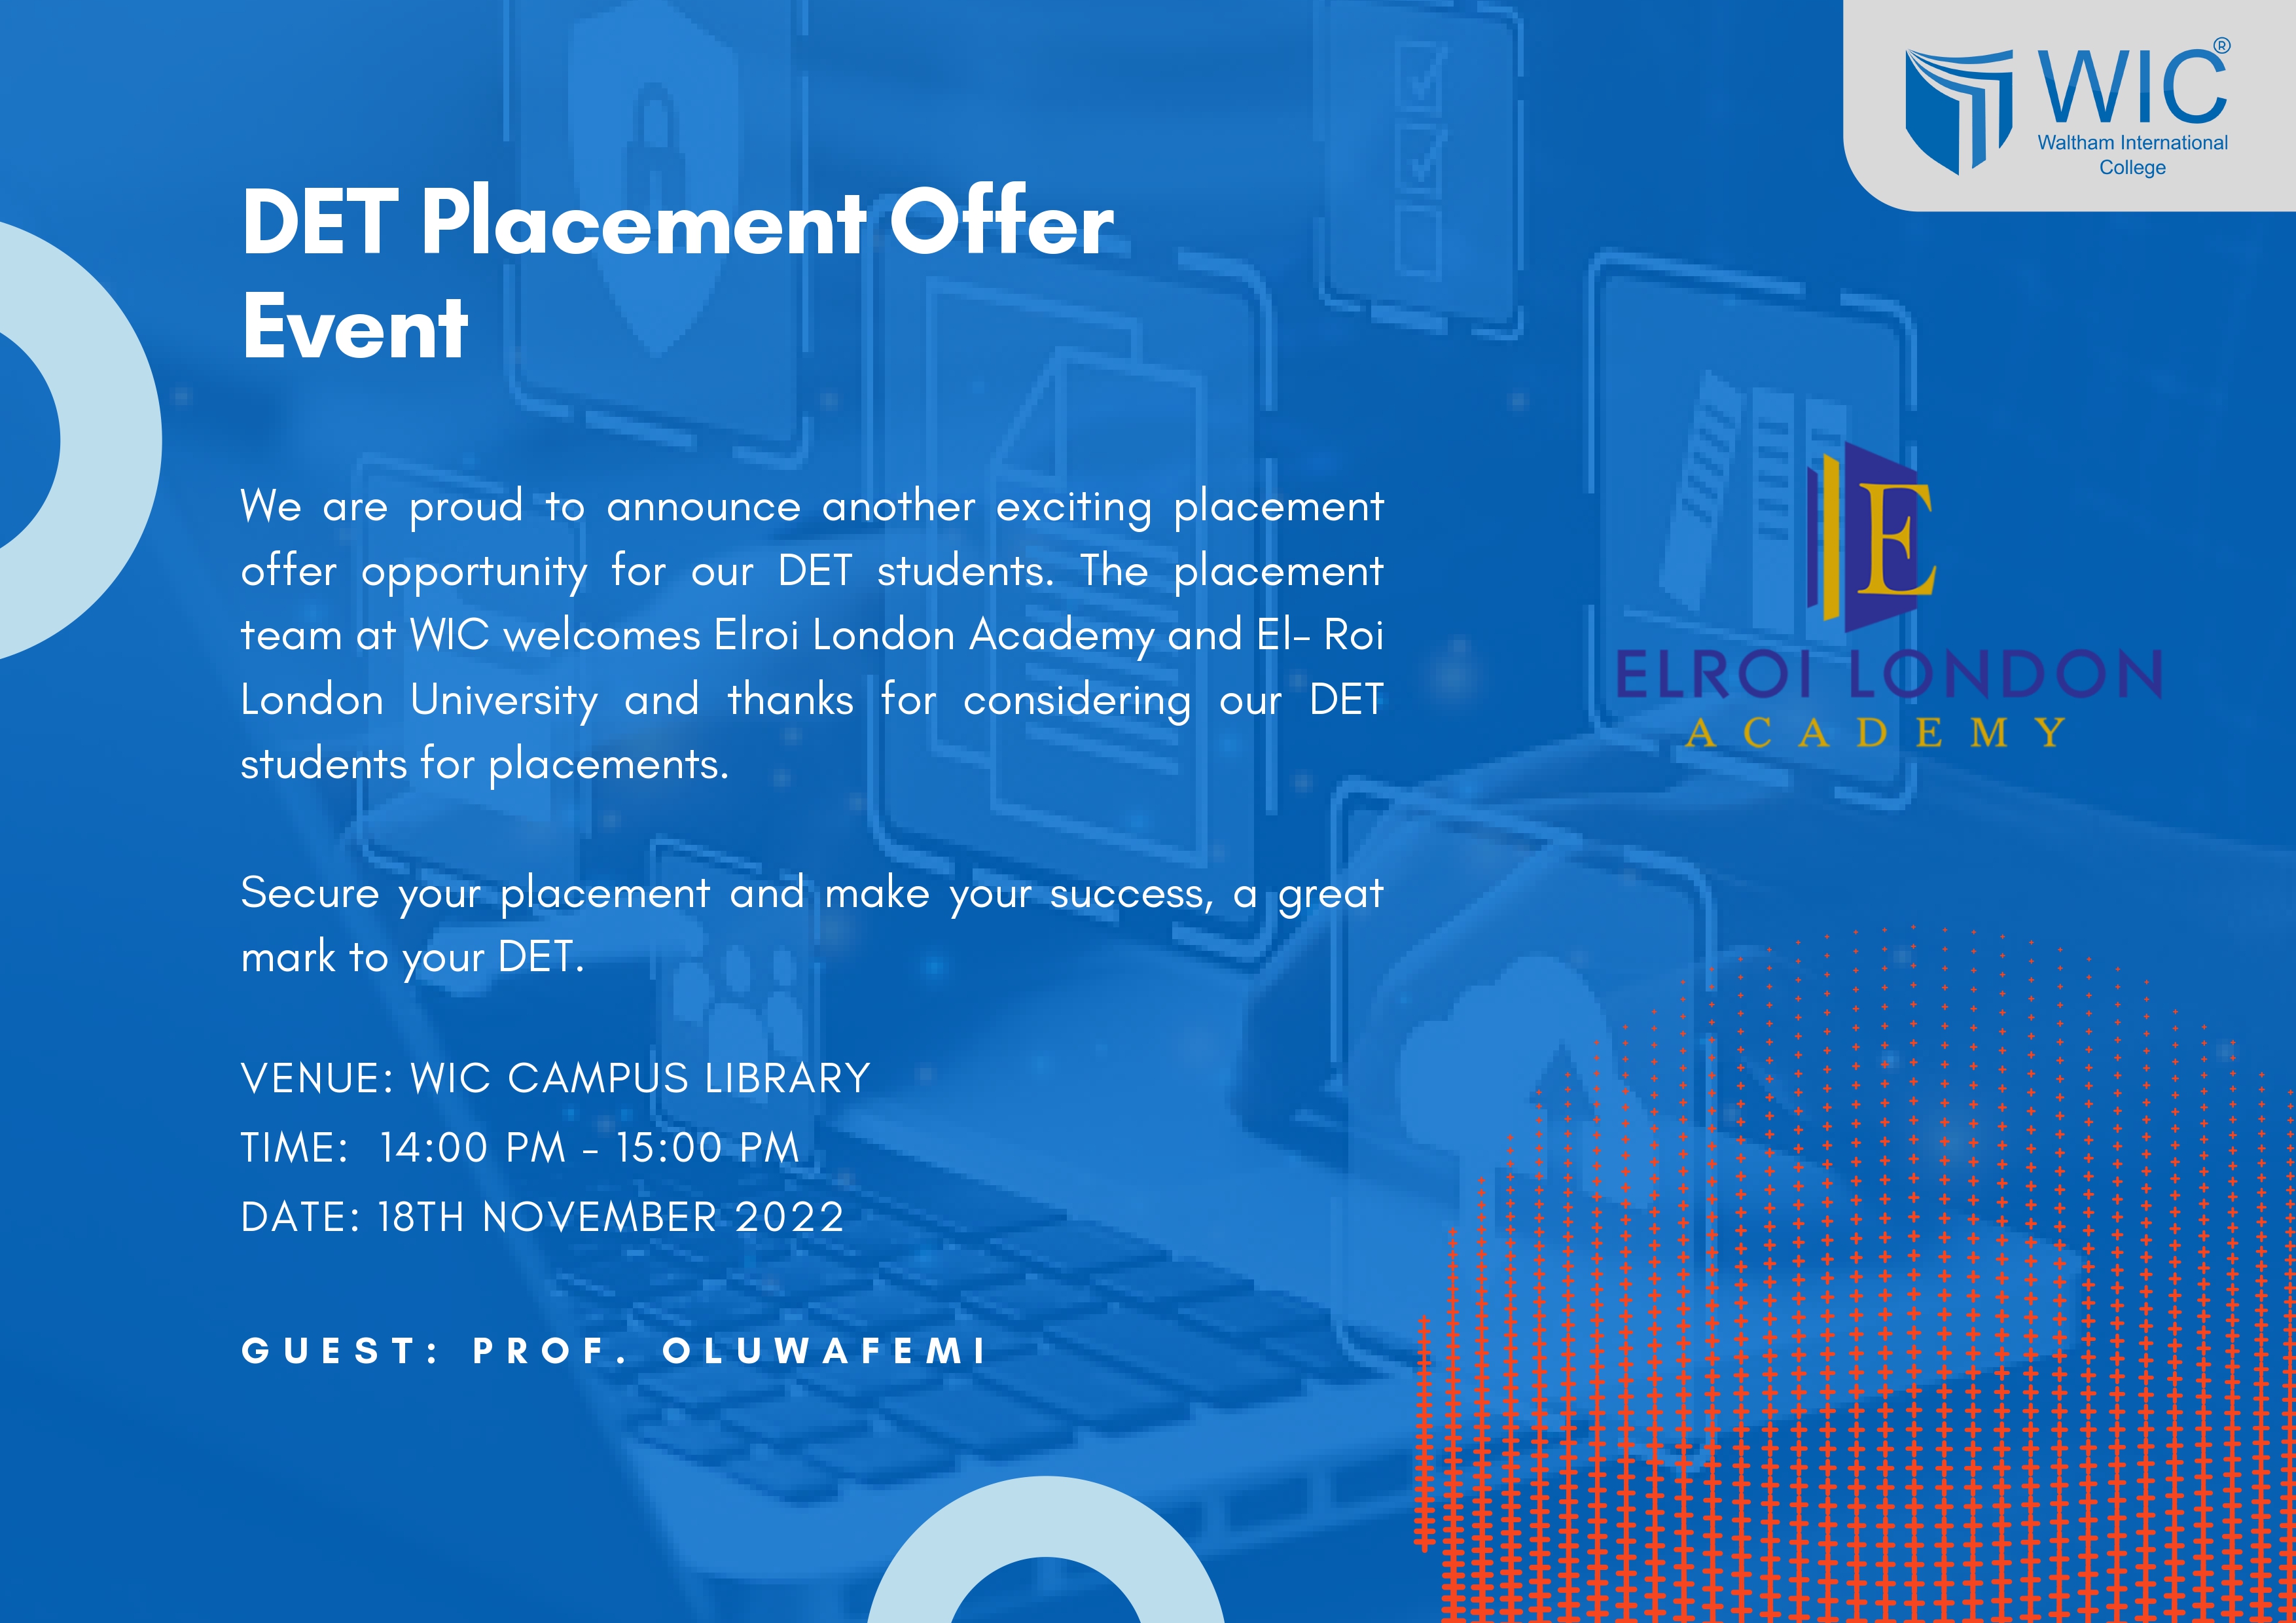 DET Placement Offer Event